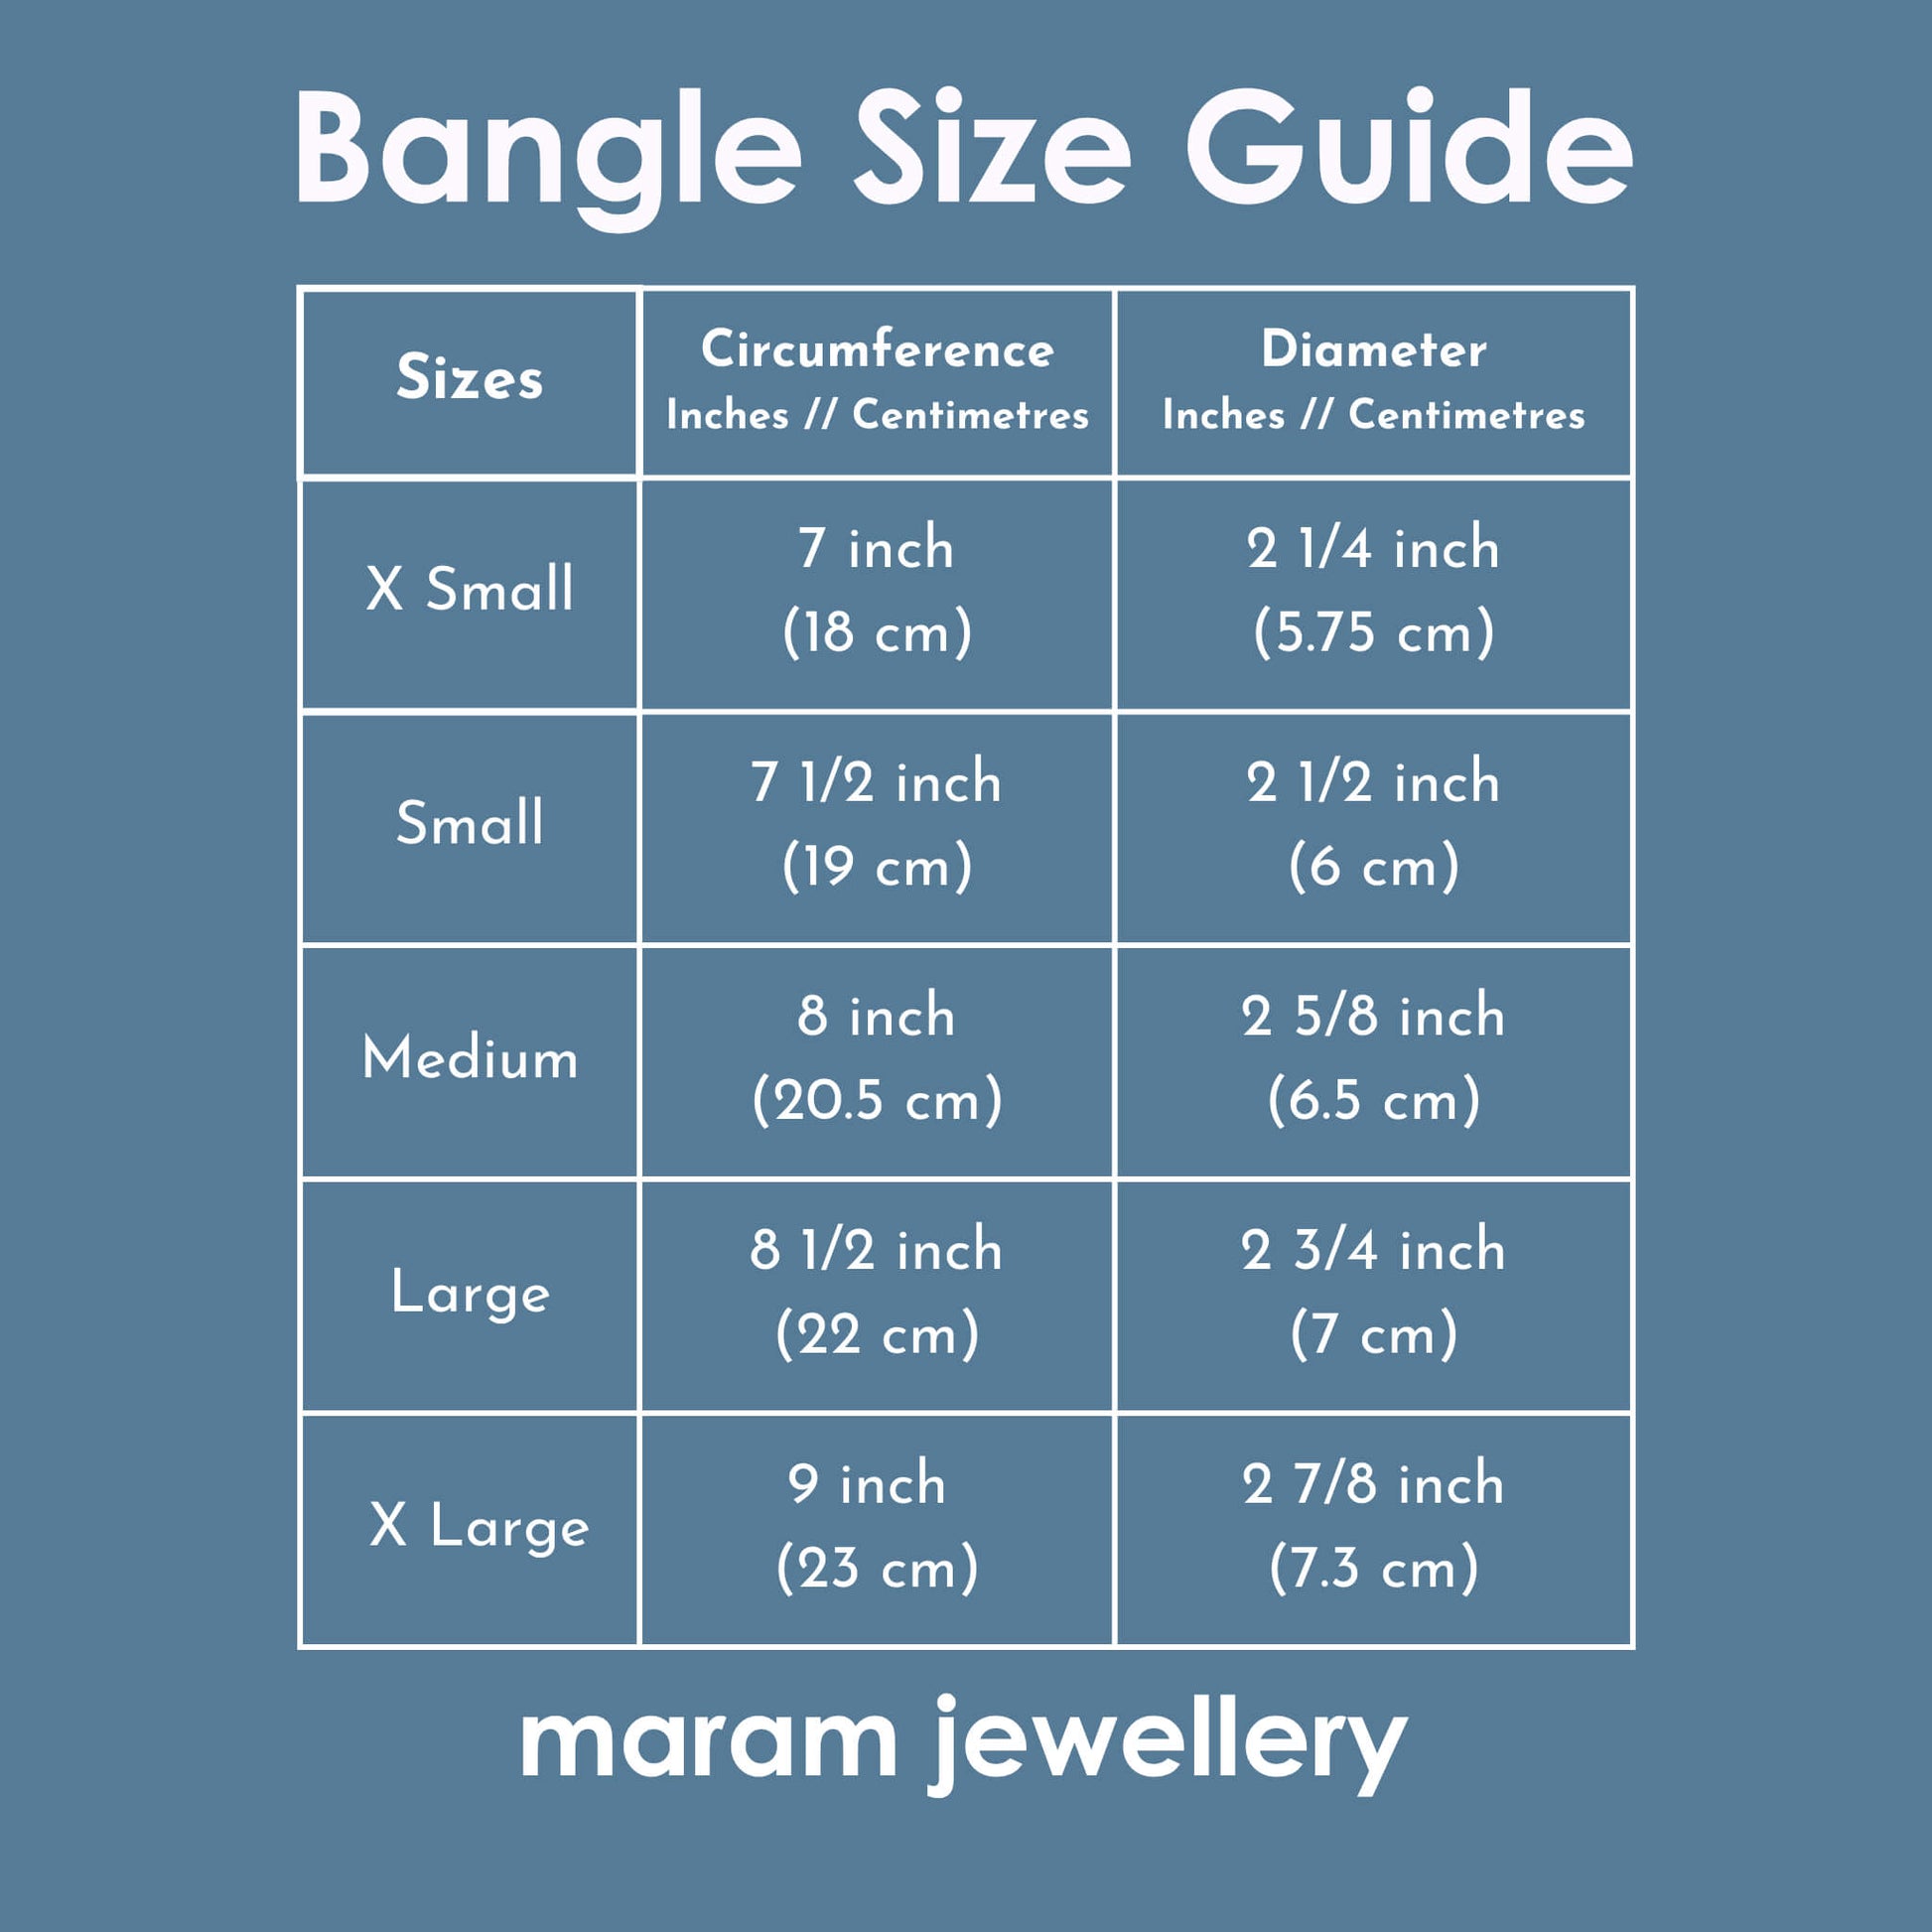 Bangle size infographic with size of maram jewellery bangles. In circumference: Small is 7.5 inch, Medium is 8 inch, Large is 8 1/2 inch and Extra large is 9 inch. 